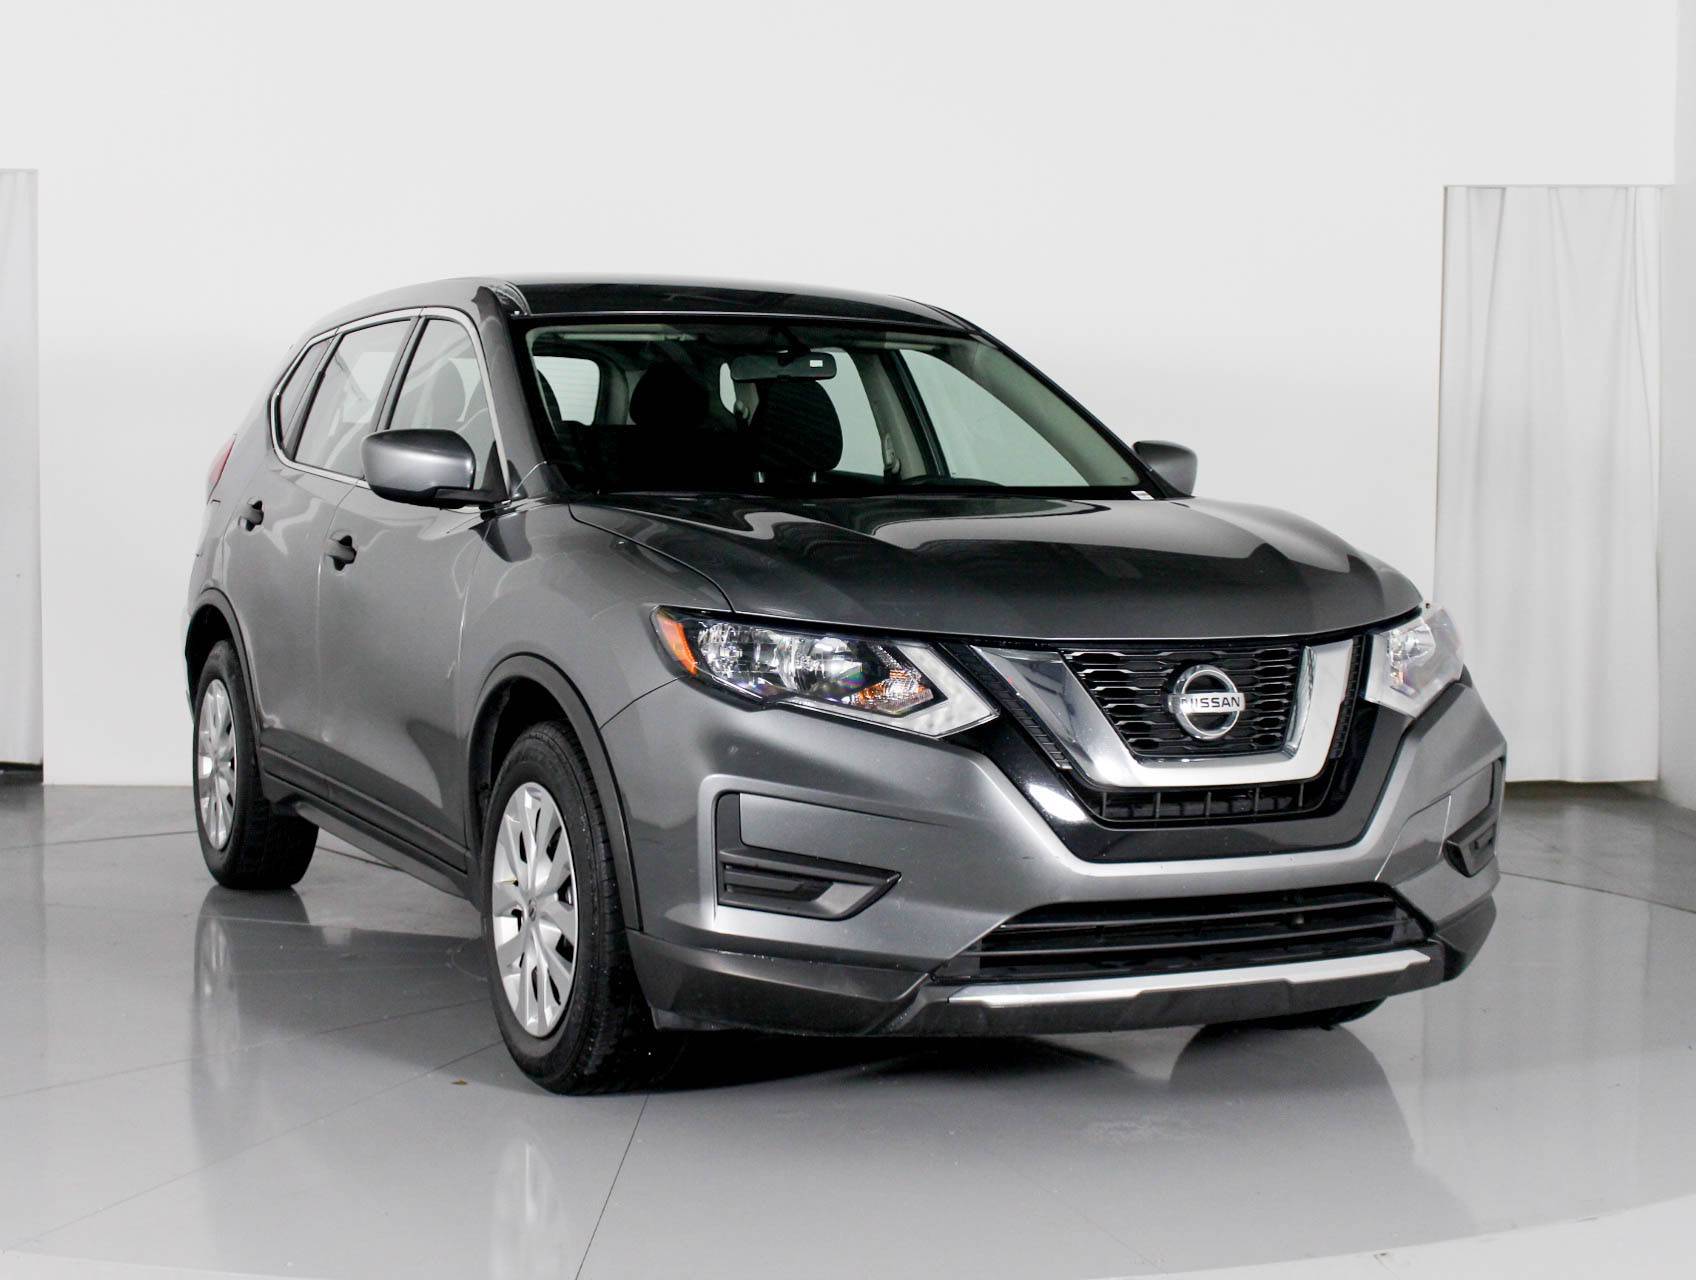 Florida Fine Cars - Used NISSAN ROGUE 2017 MARGATE S